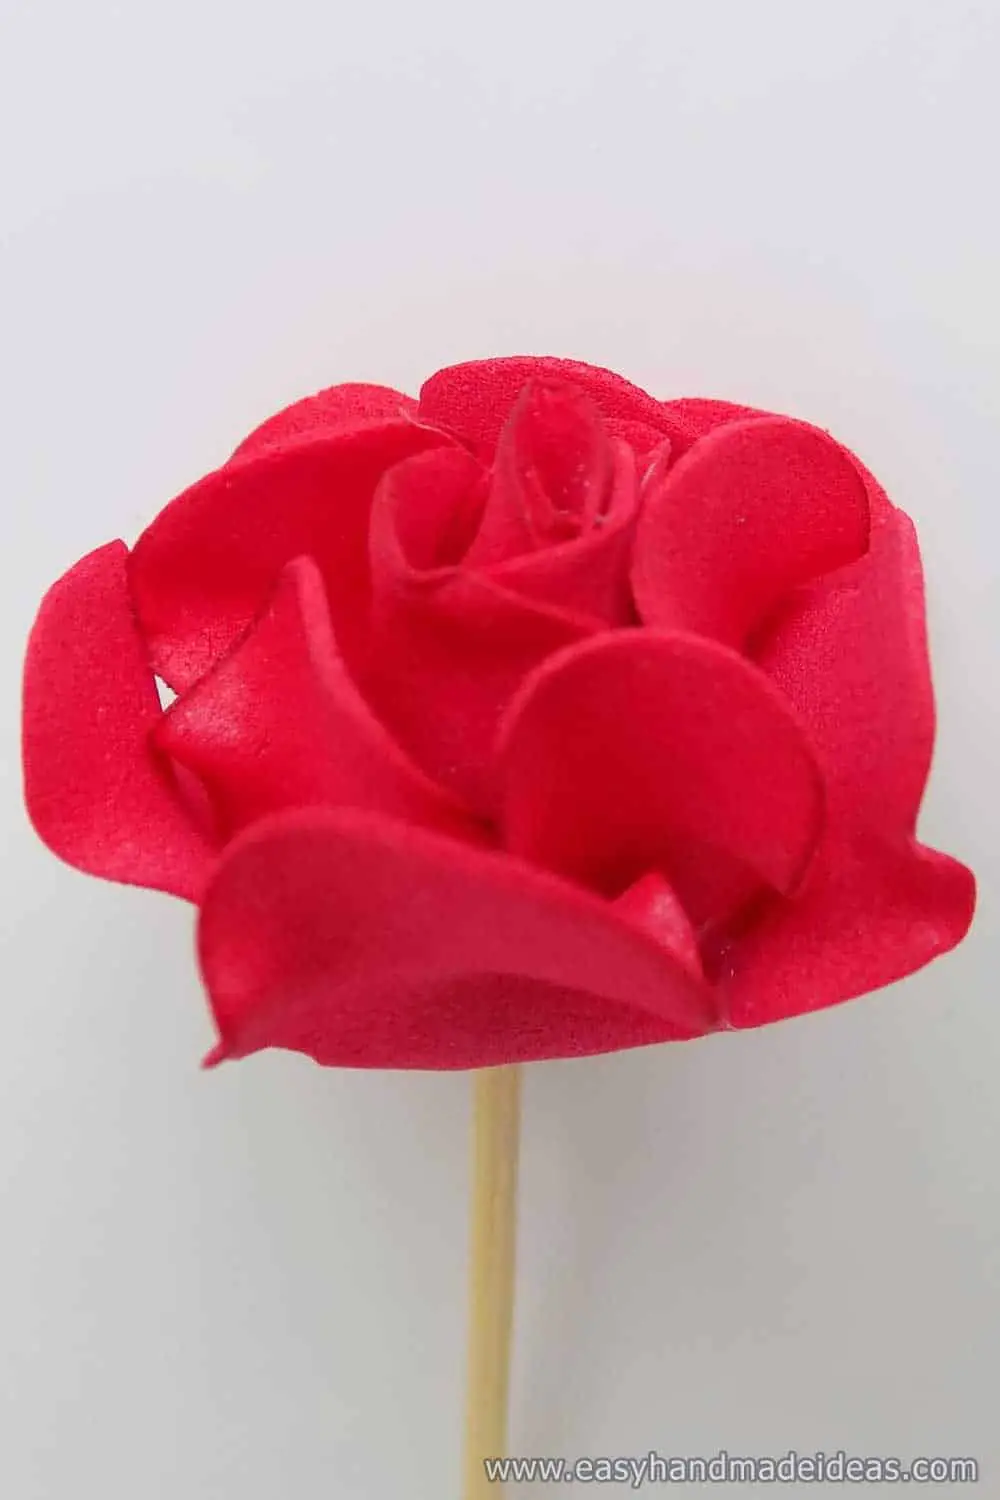 Rose with Formed Petals